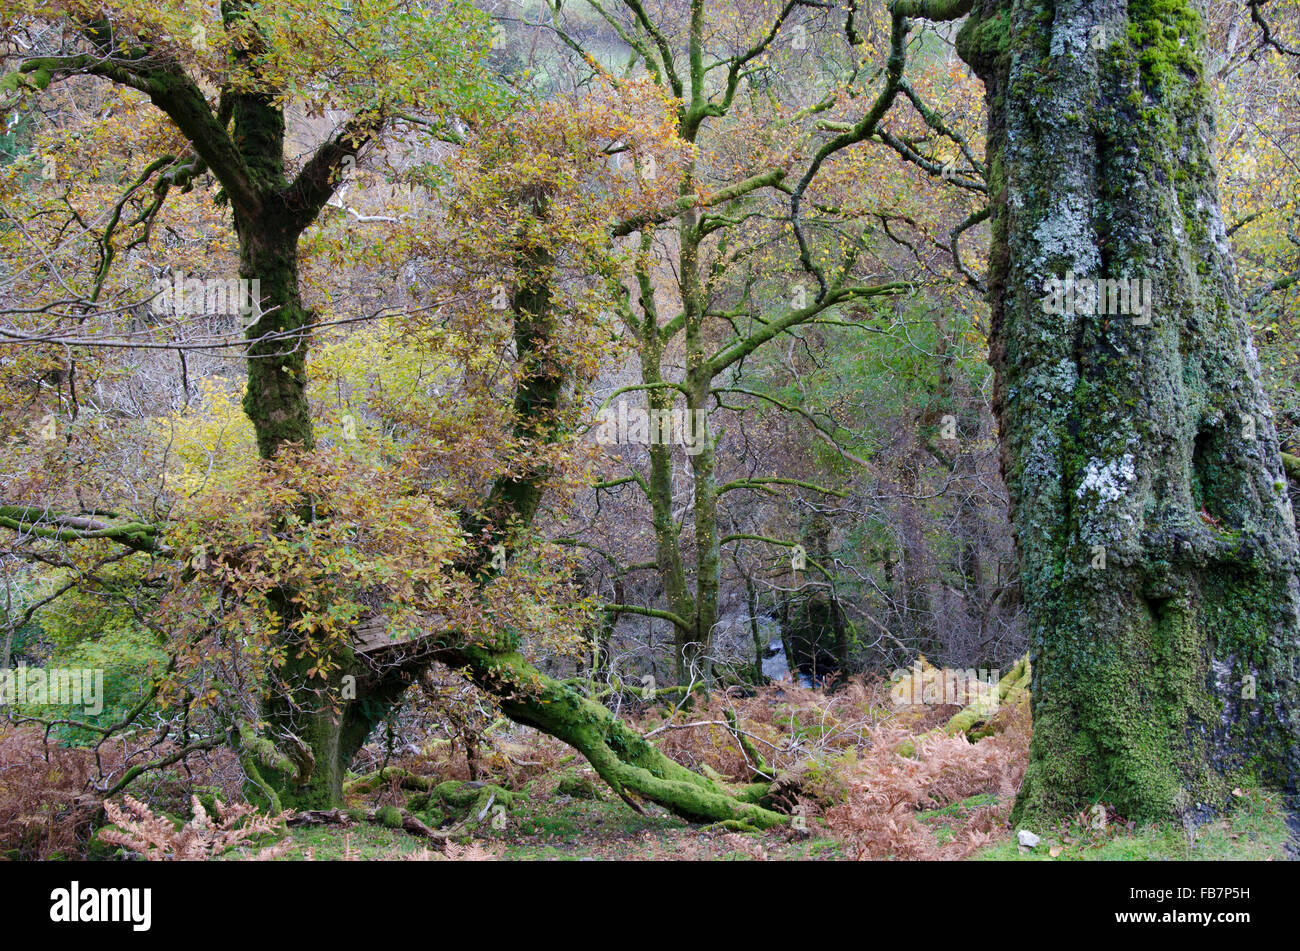 Autumn woodland scene in Snowdonia national park. Fallen leaves and bright autumnal colours and bracken forms a wilted carpet. Stock Photo